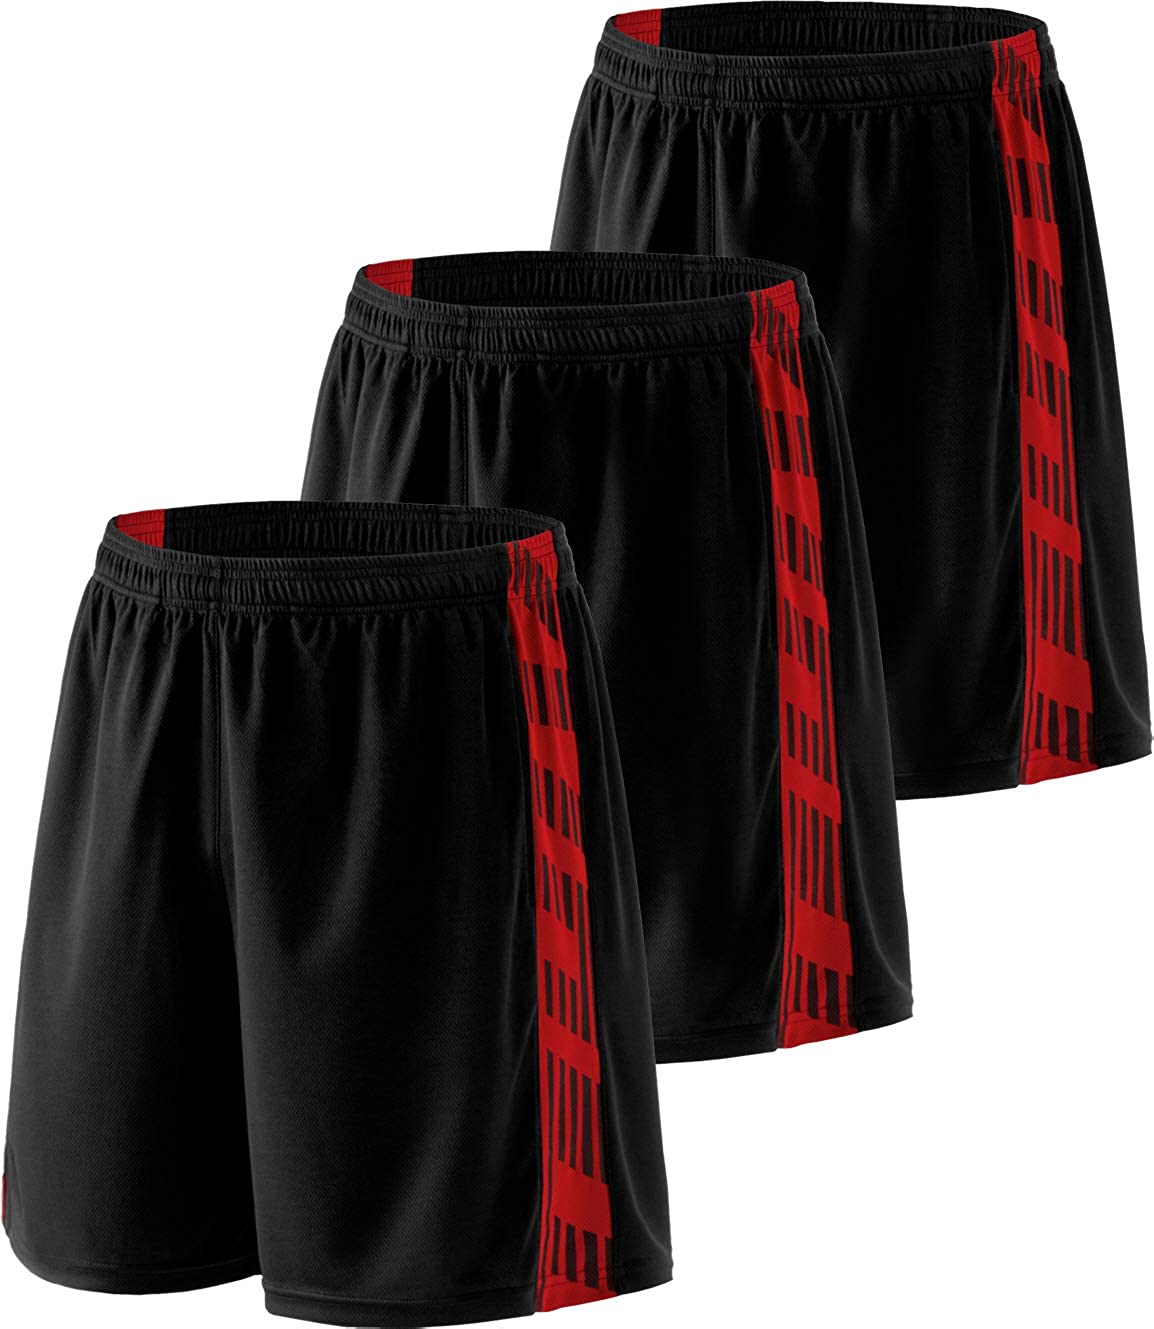 ATHLIO 1 Gym Training Workout Shorts 2 or 3 Pack Mens Active Running Shorts Quick Dry Mesh Athletic Shorts with Pockets